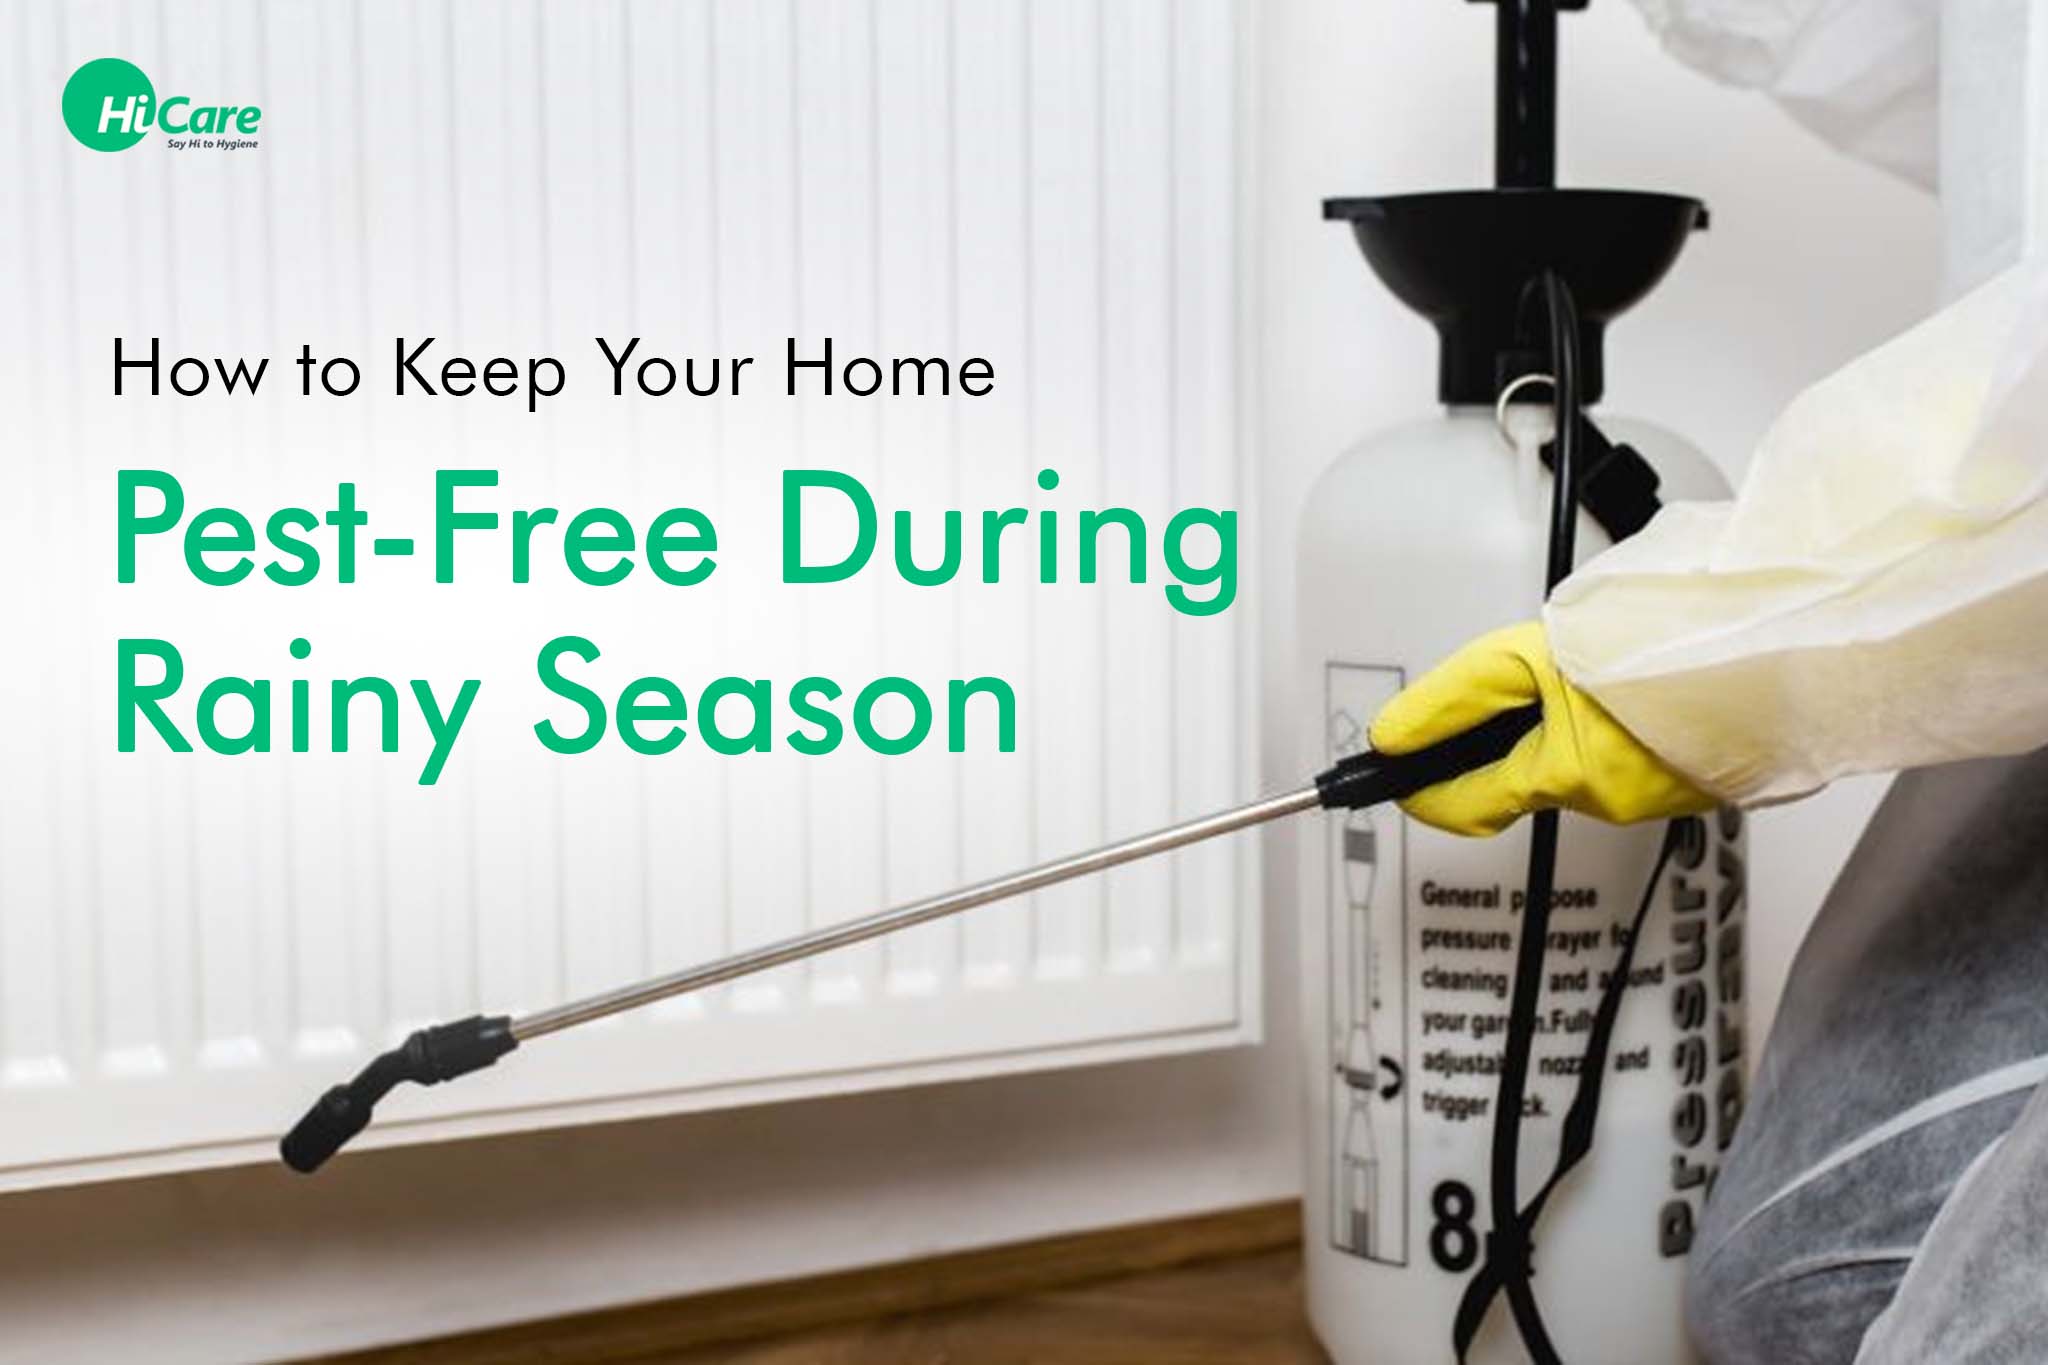 How to Keep Your Home Pest-Free During Rainy Season